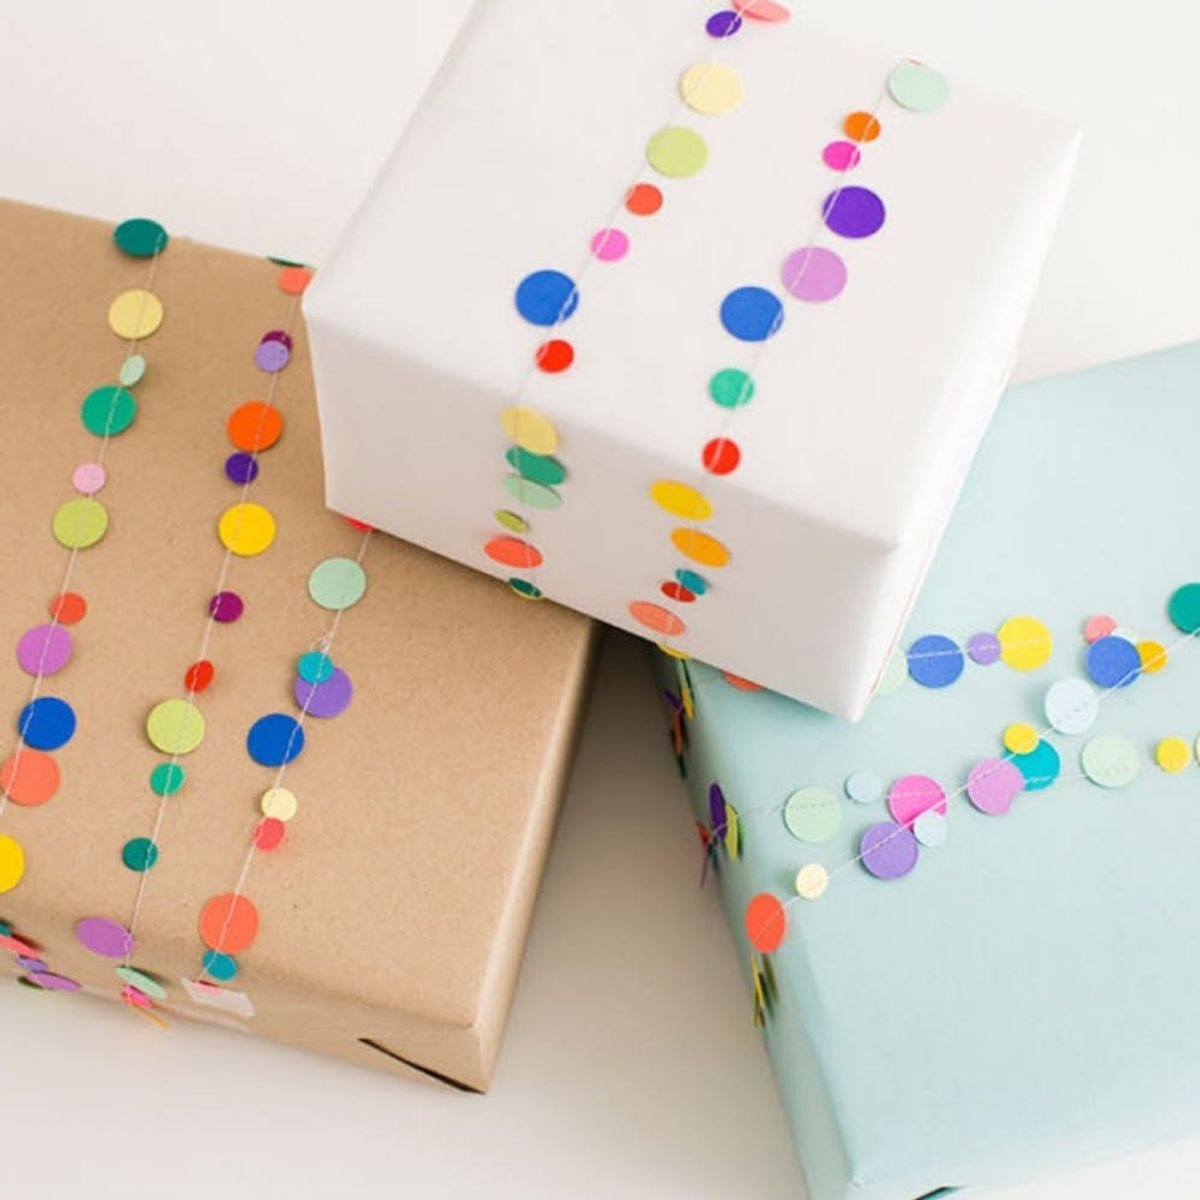 11 Things You Need to Stock Up on for Creative Gift Wrapping